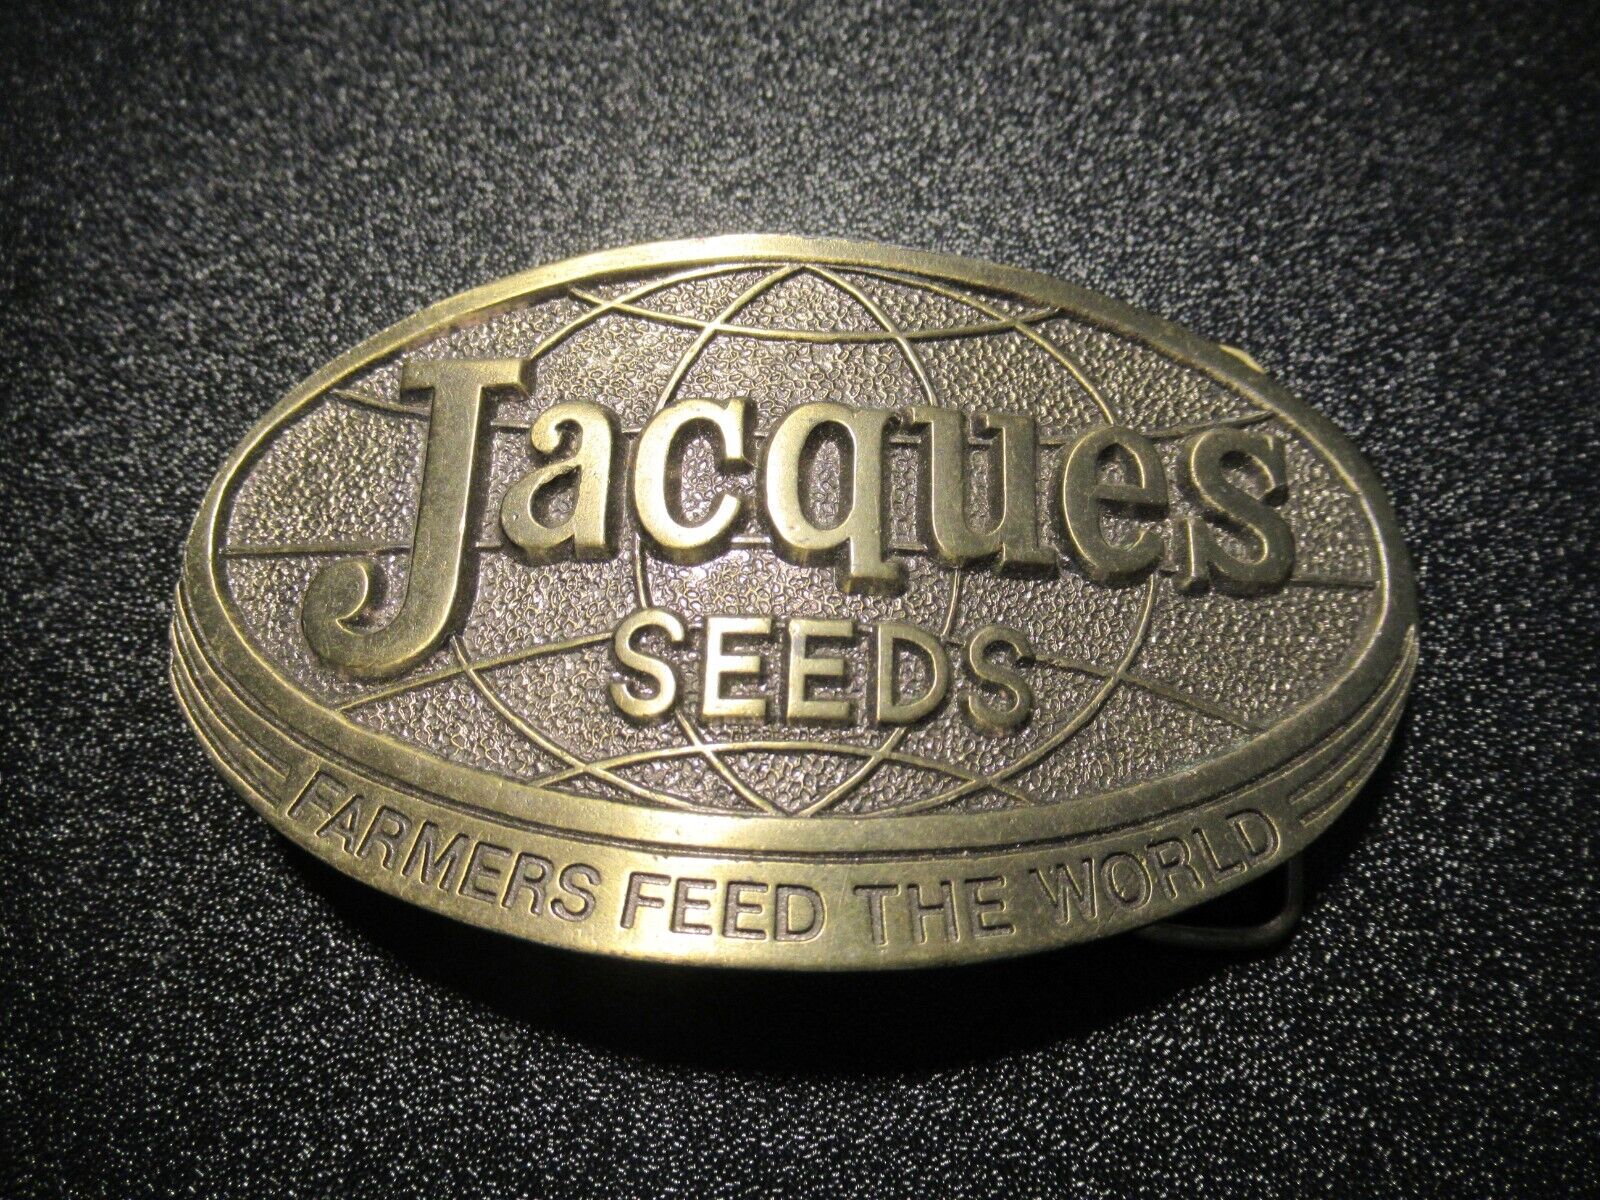 Vintage 1977 Brass Belt Buckle Jacques Seeds Farmers Feed The World Made USA